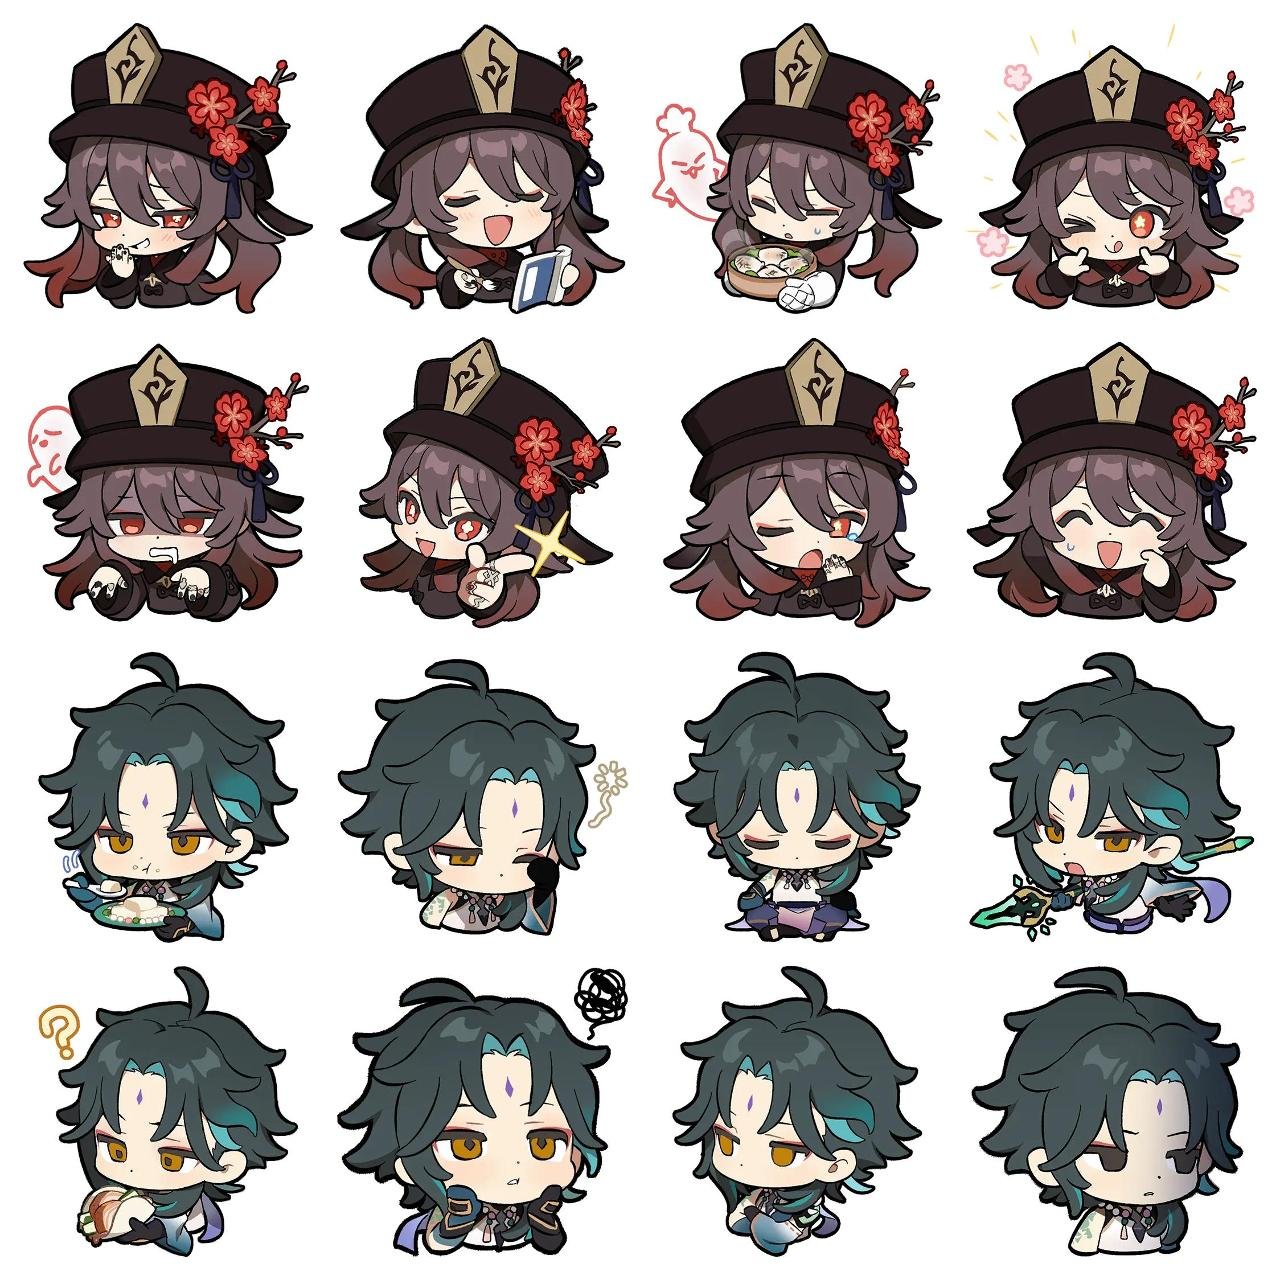 Genshin Impact #12 Anime, Genshin Impact, Game sticker pack for Whatsapp, Telegram, Signal, and others chatting and message apps